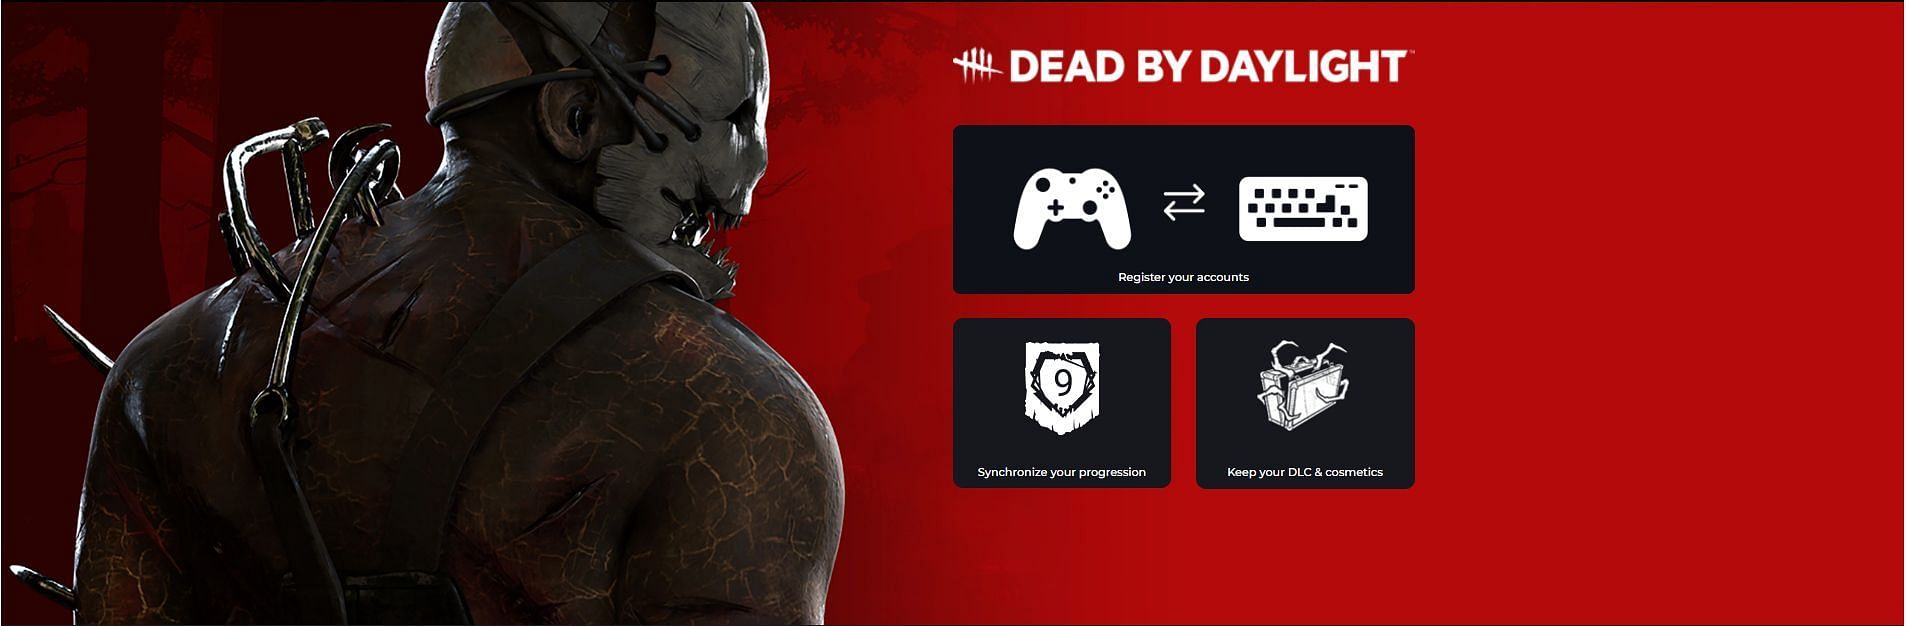 This portion of the site shows what the cross-platform feature provides (Image via Behaviour Interactive Inc.)